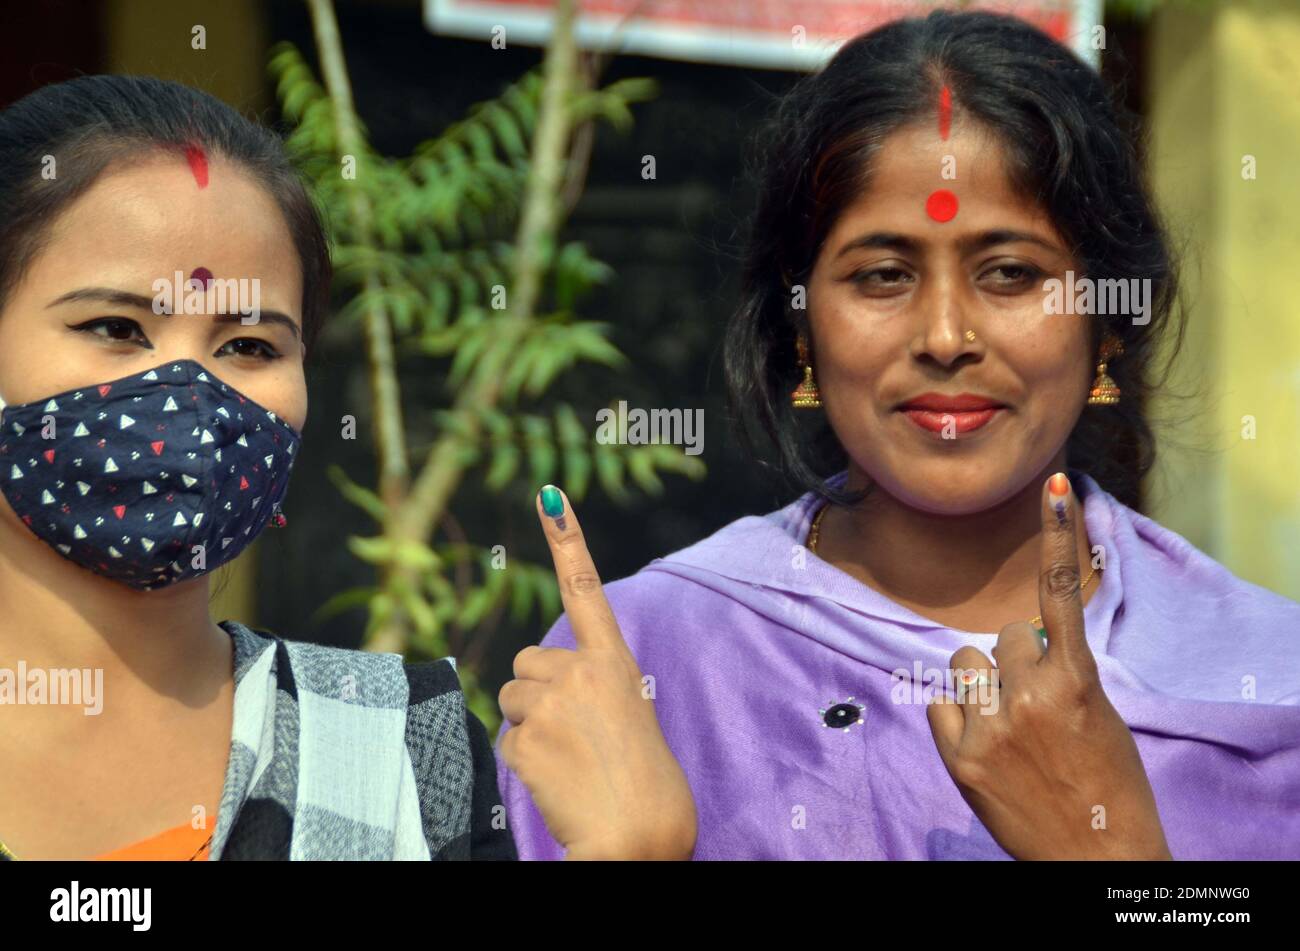 Nagaon, Assam, India - 17  December 2020: Two female voters shows her marks on fingers after casting their votes at a Polling station during the Tiwa Autonomous Council election in Kachamari village in Nagaon district of Assam, India on Thursday.  Credit: DIGANTA TALUKDAR/Alamy Live News Stock Photo